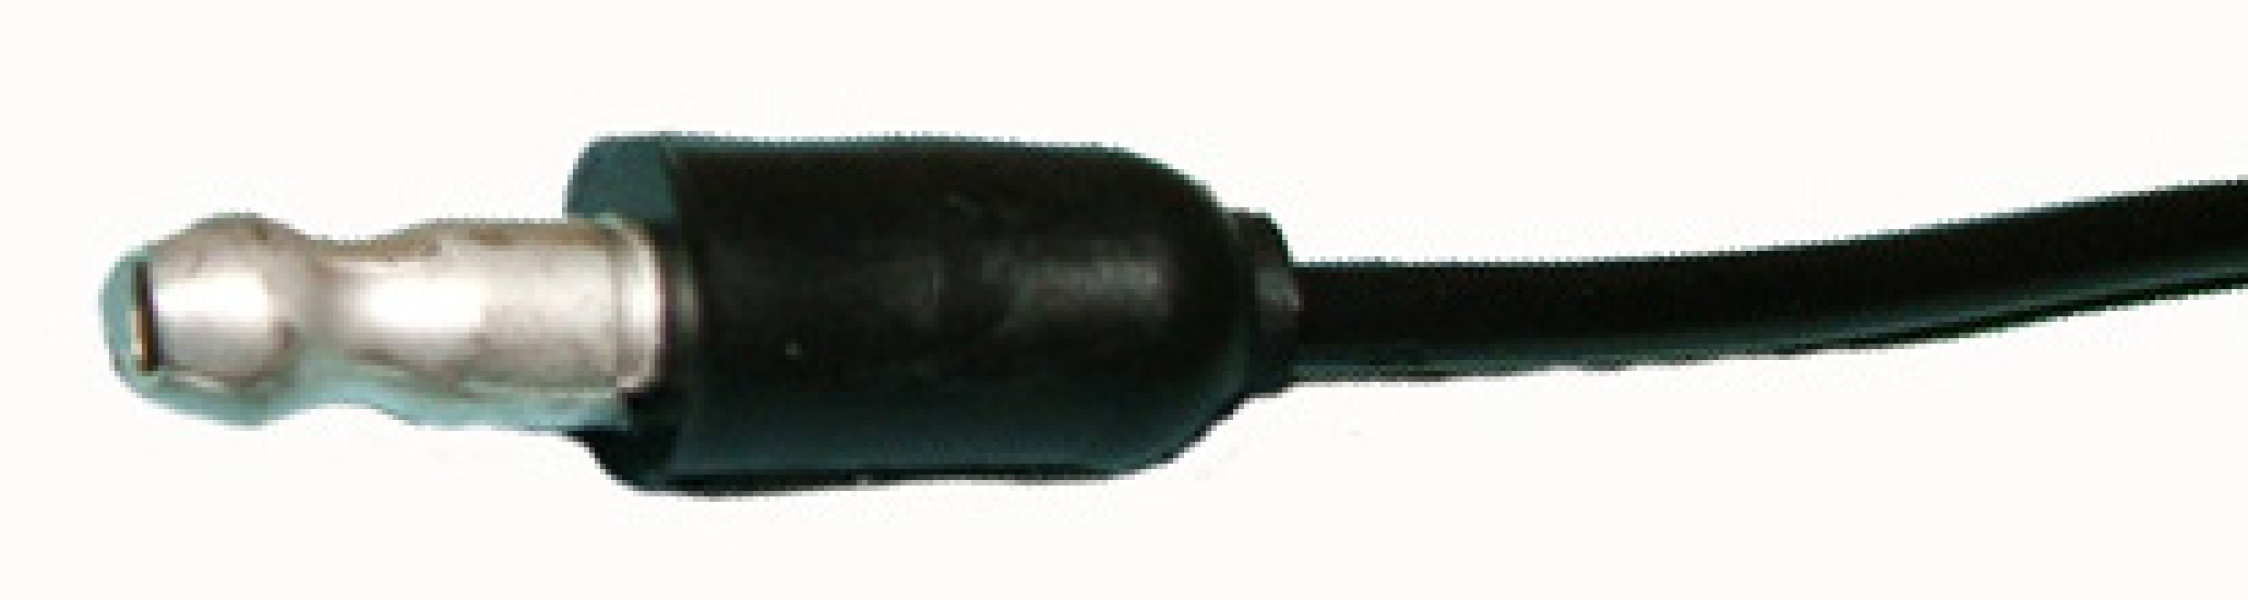 Image of A/C Compressor Clutch Connector from Sunair. Part number: PT-4002